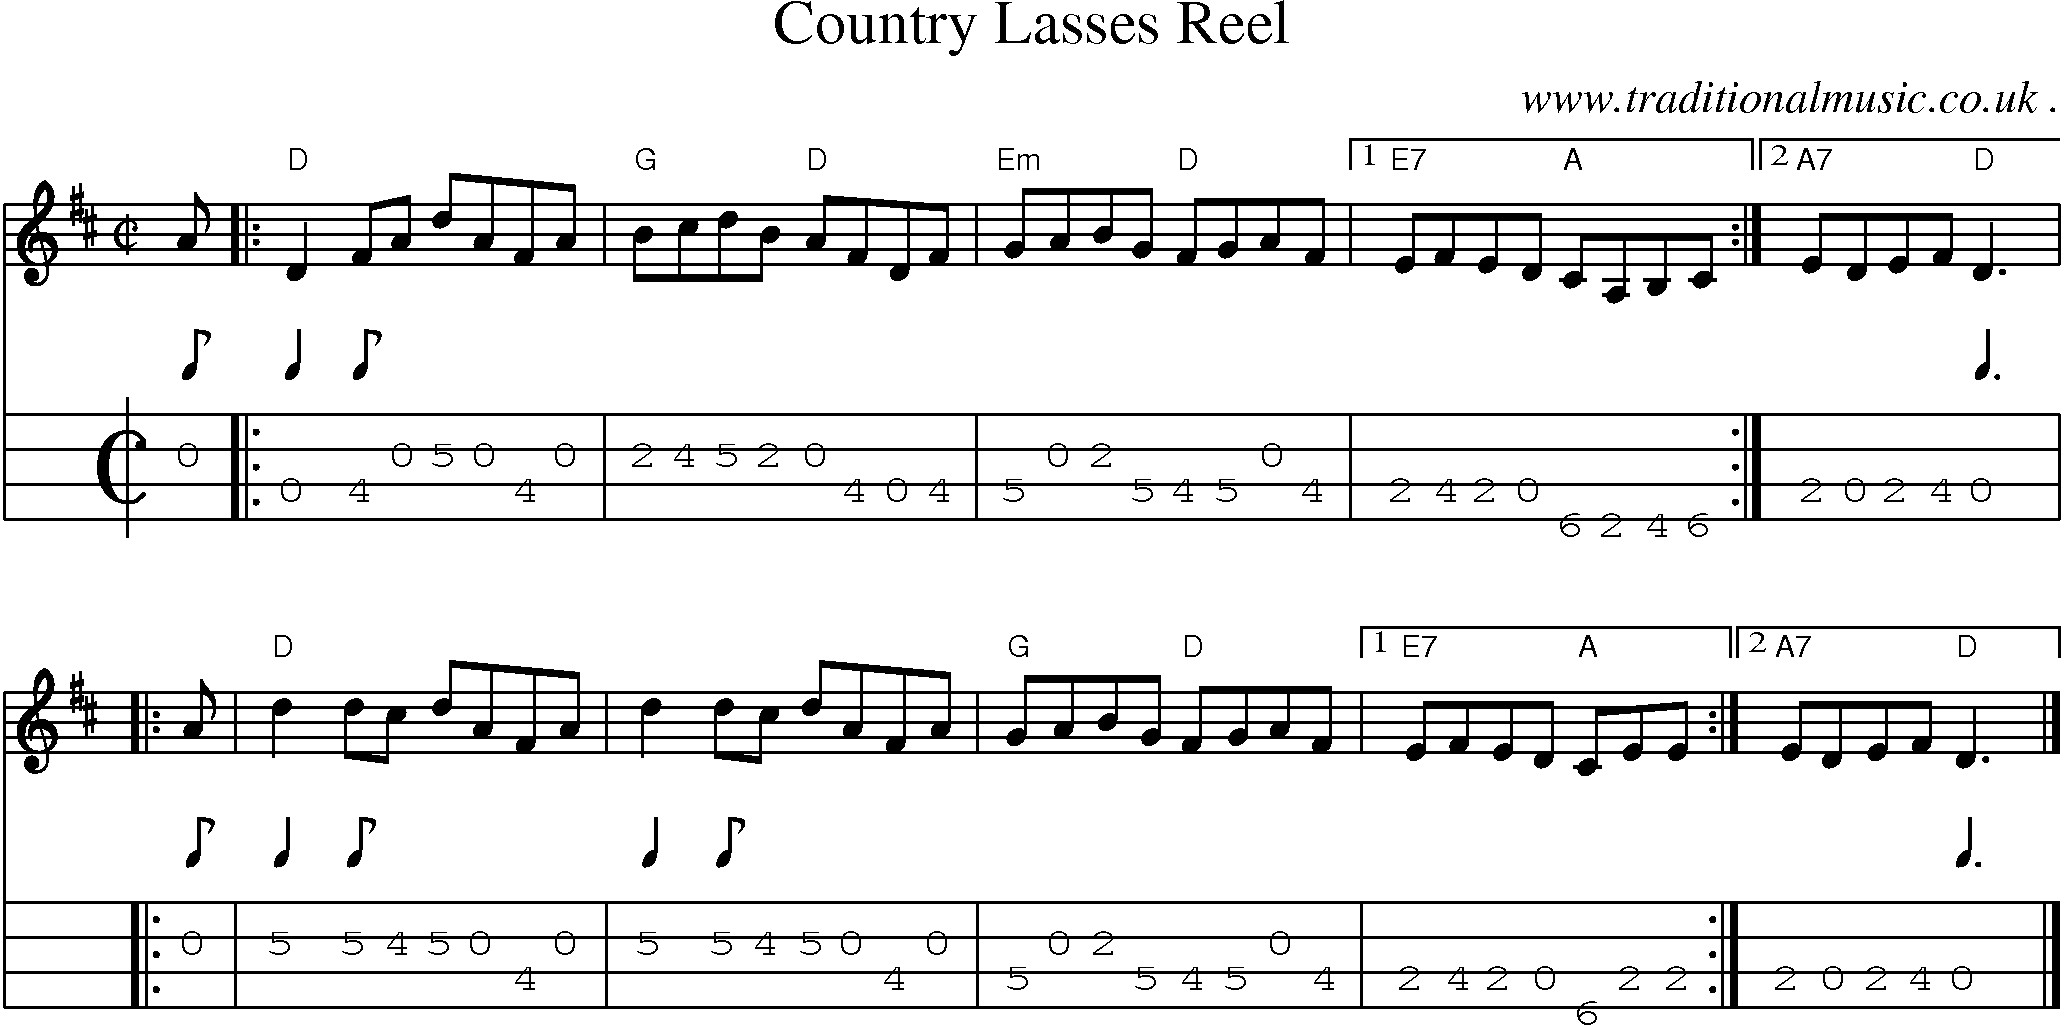 Sheet-music  score, Chords and Mandolin Tabs for Country Lasses Reel